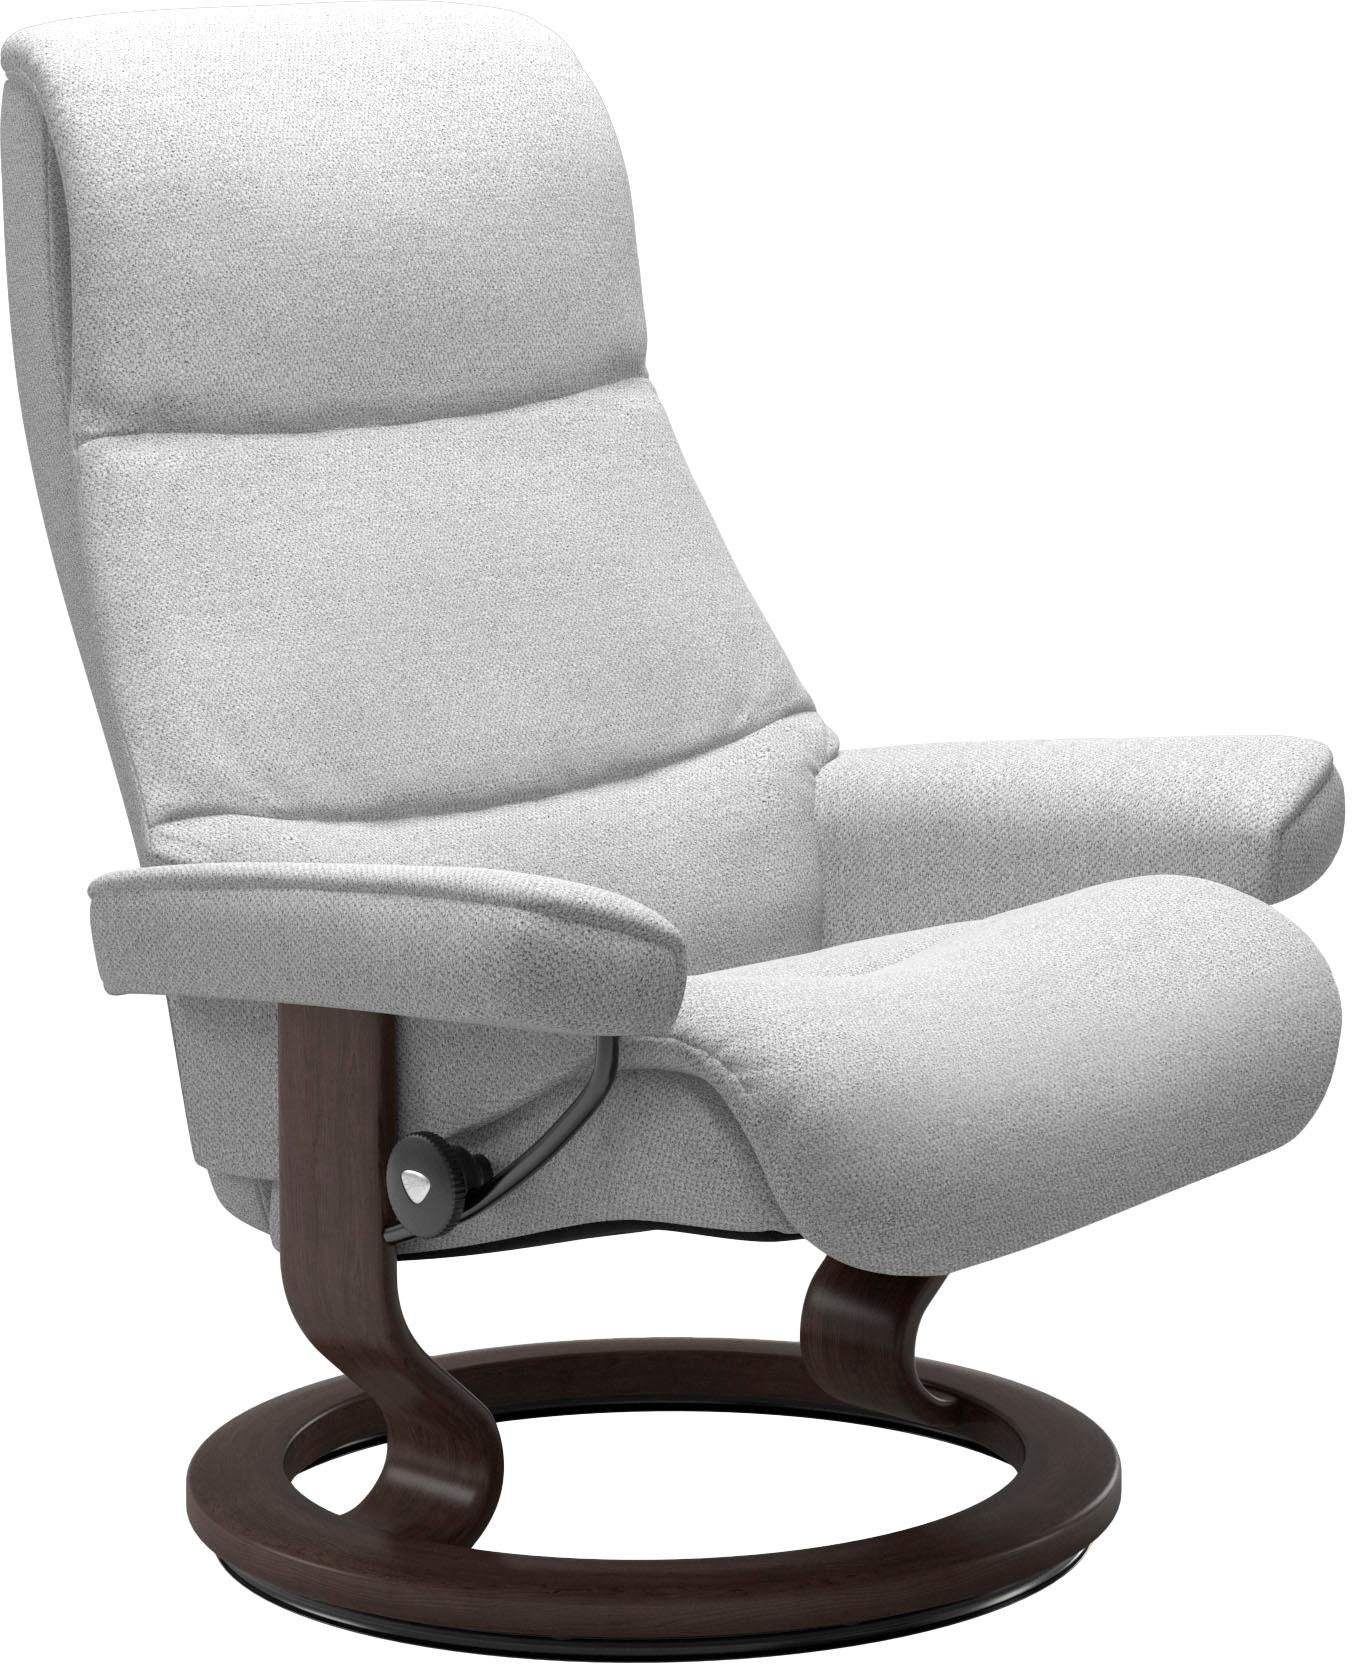 Base, Größe View, Relaxsessel Stressless® Wenge L,Gestell Classic mit